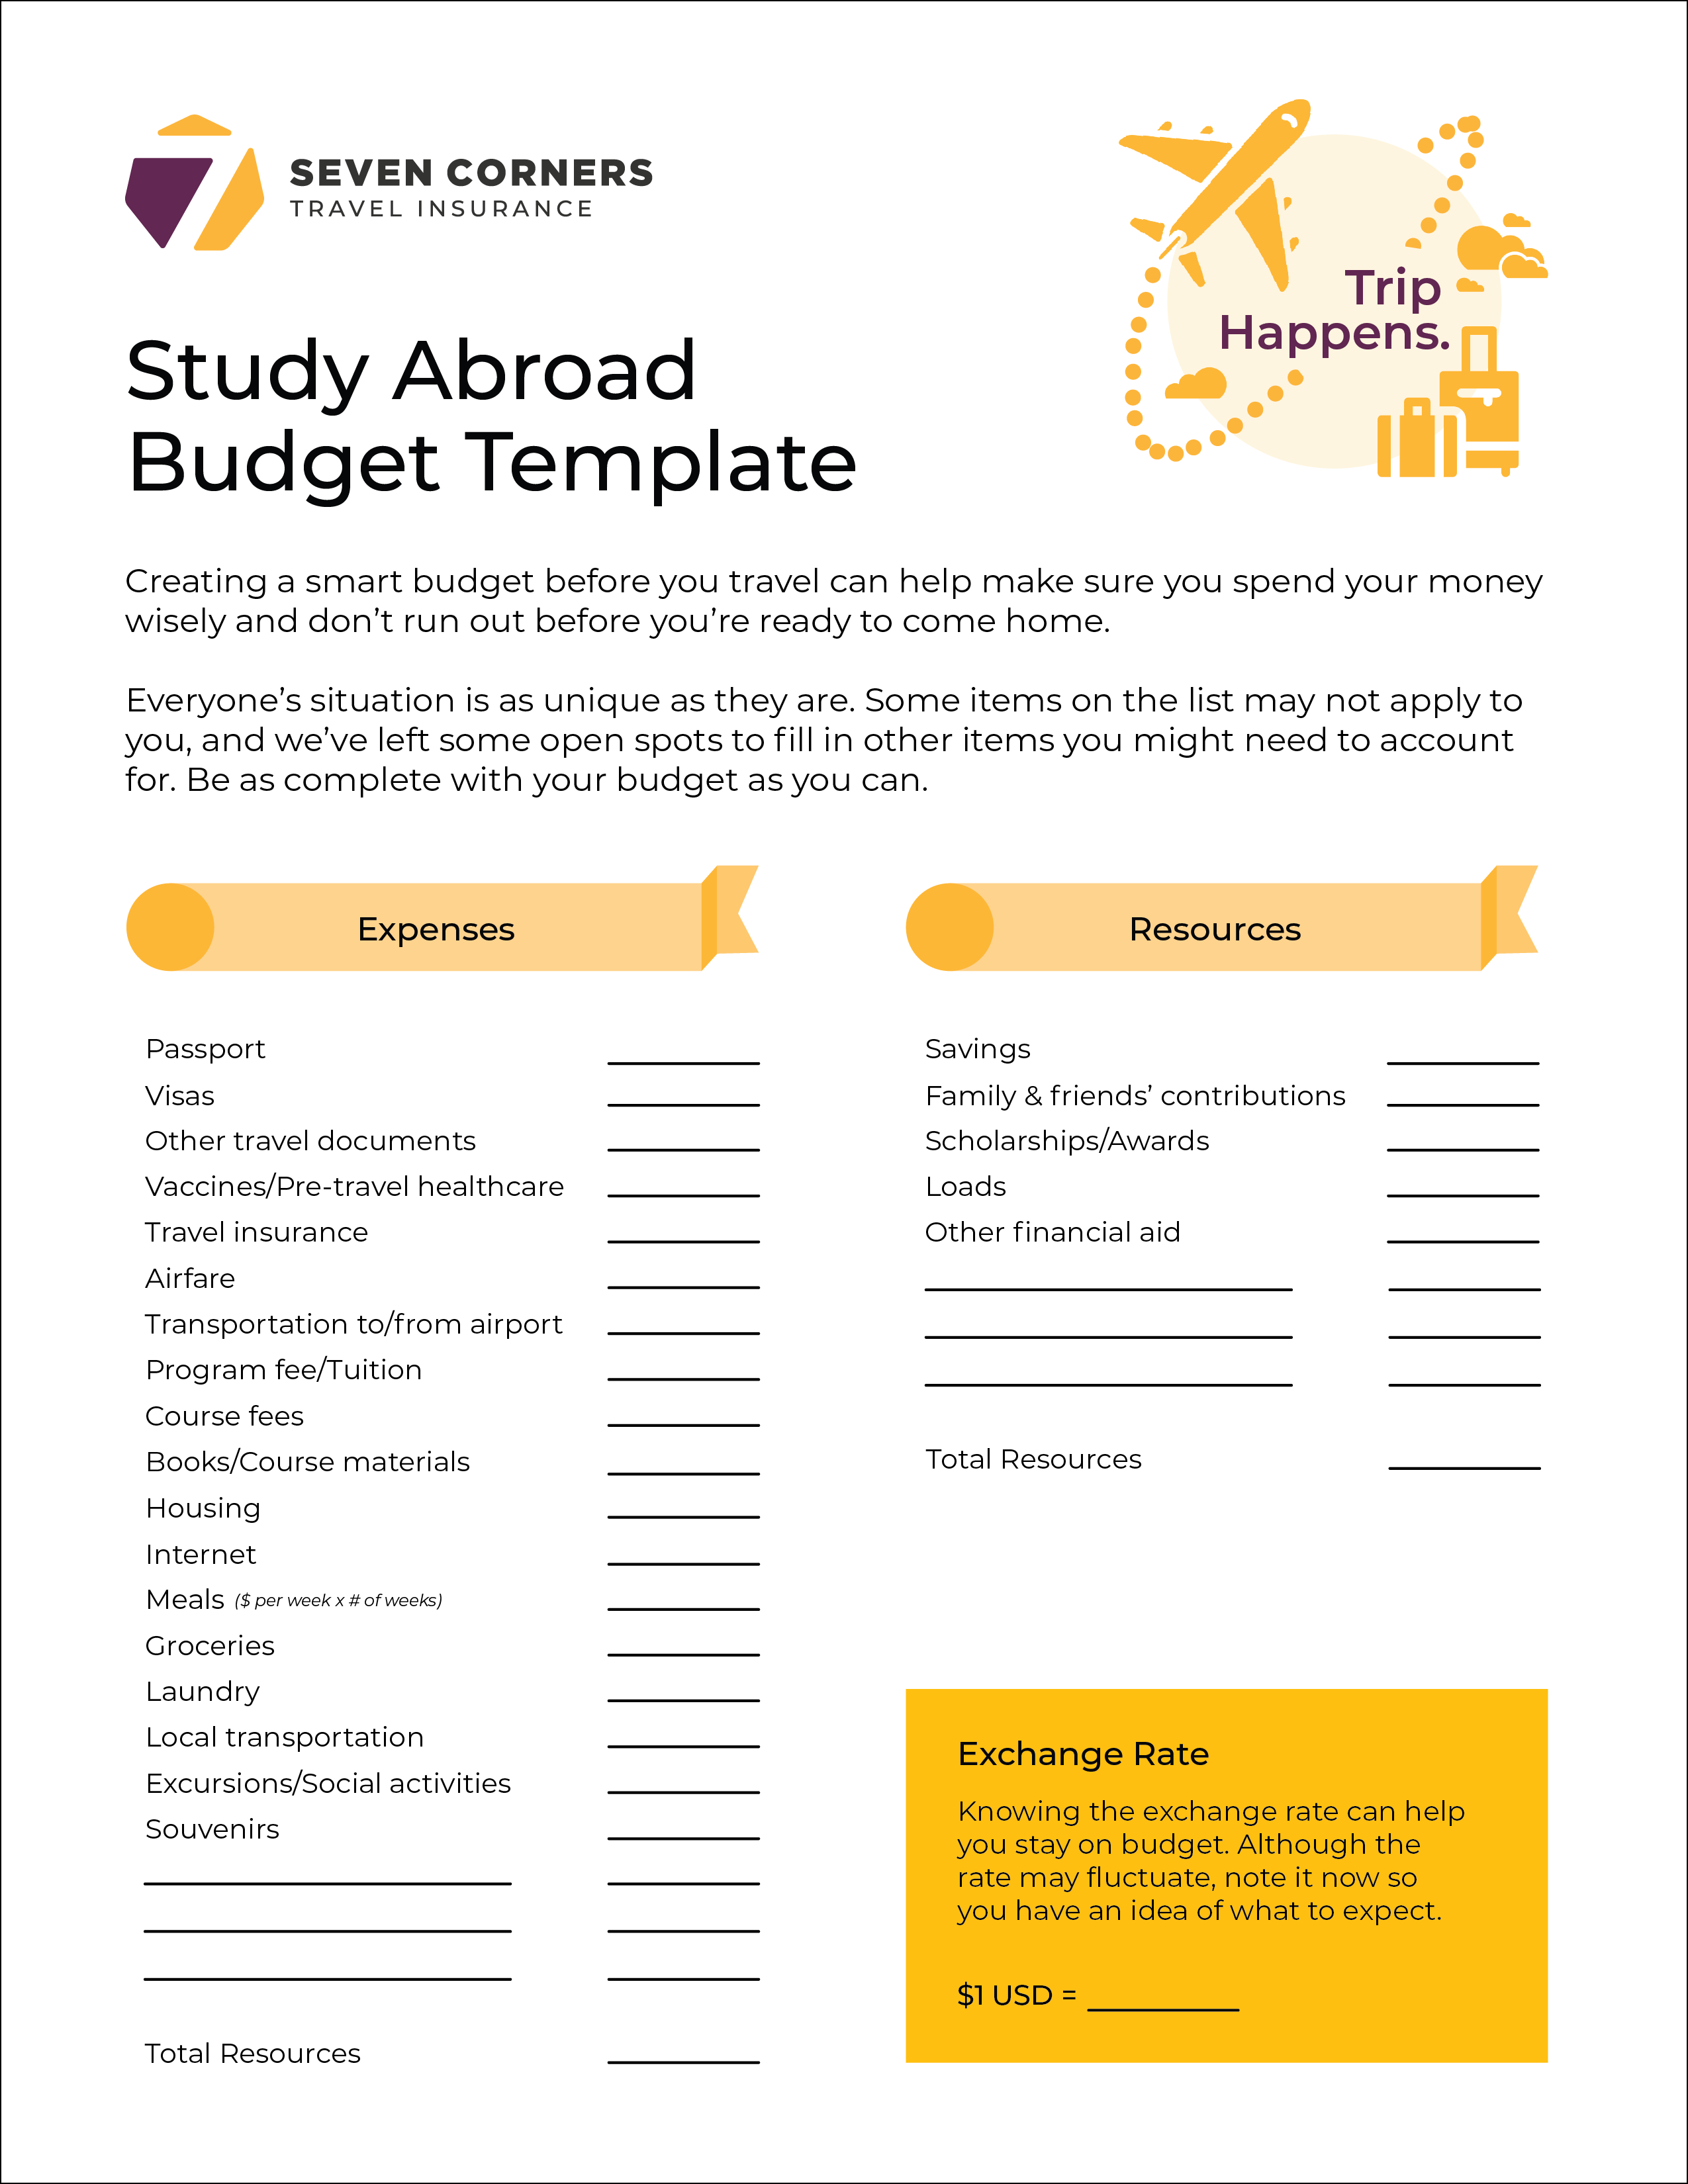 Study Abroad Budget Template